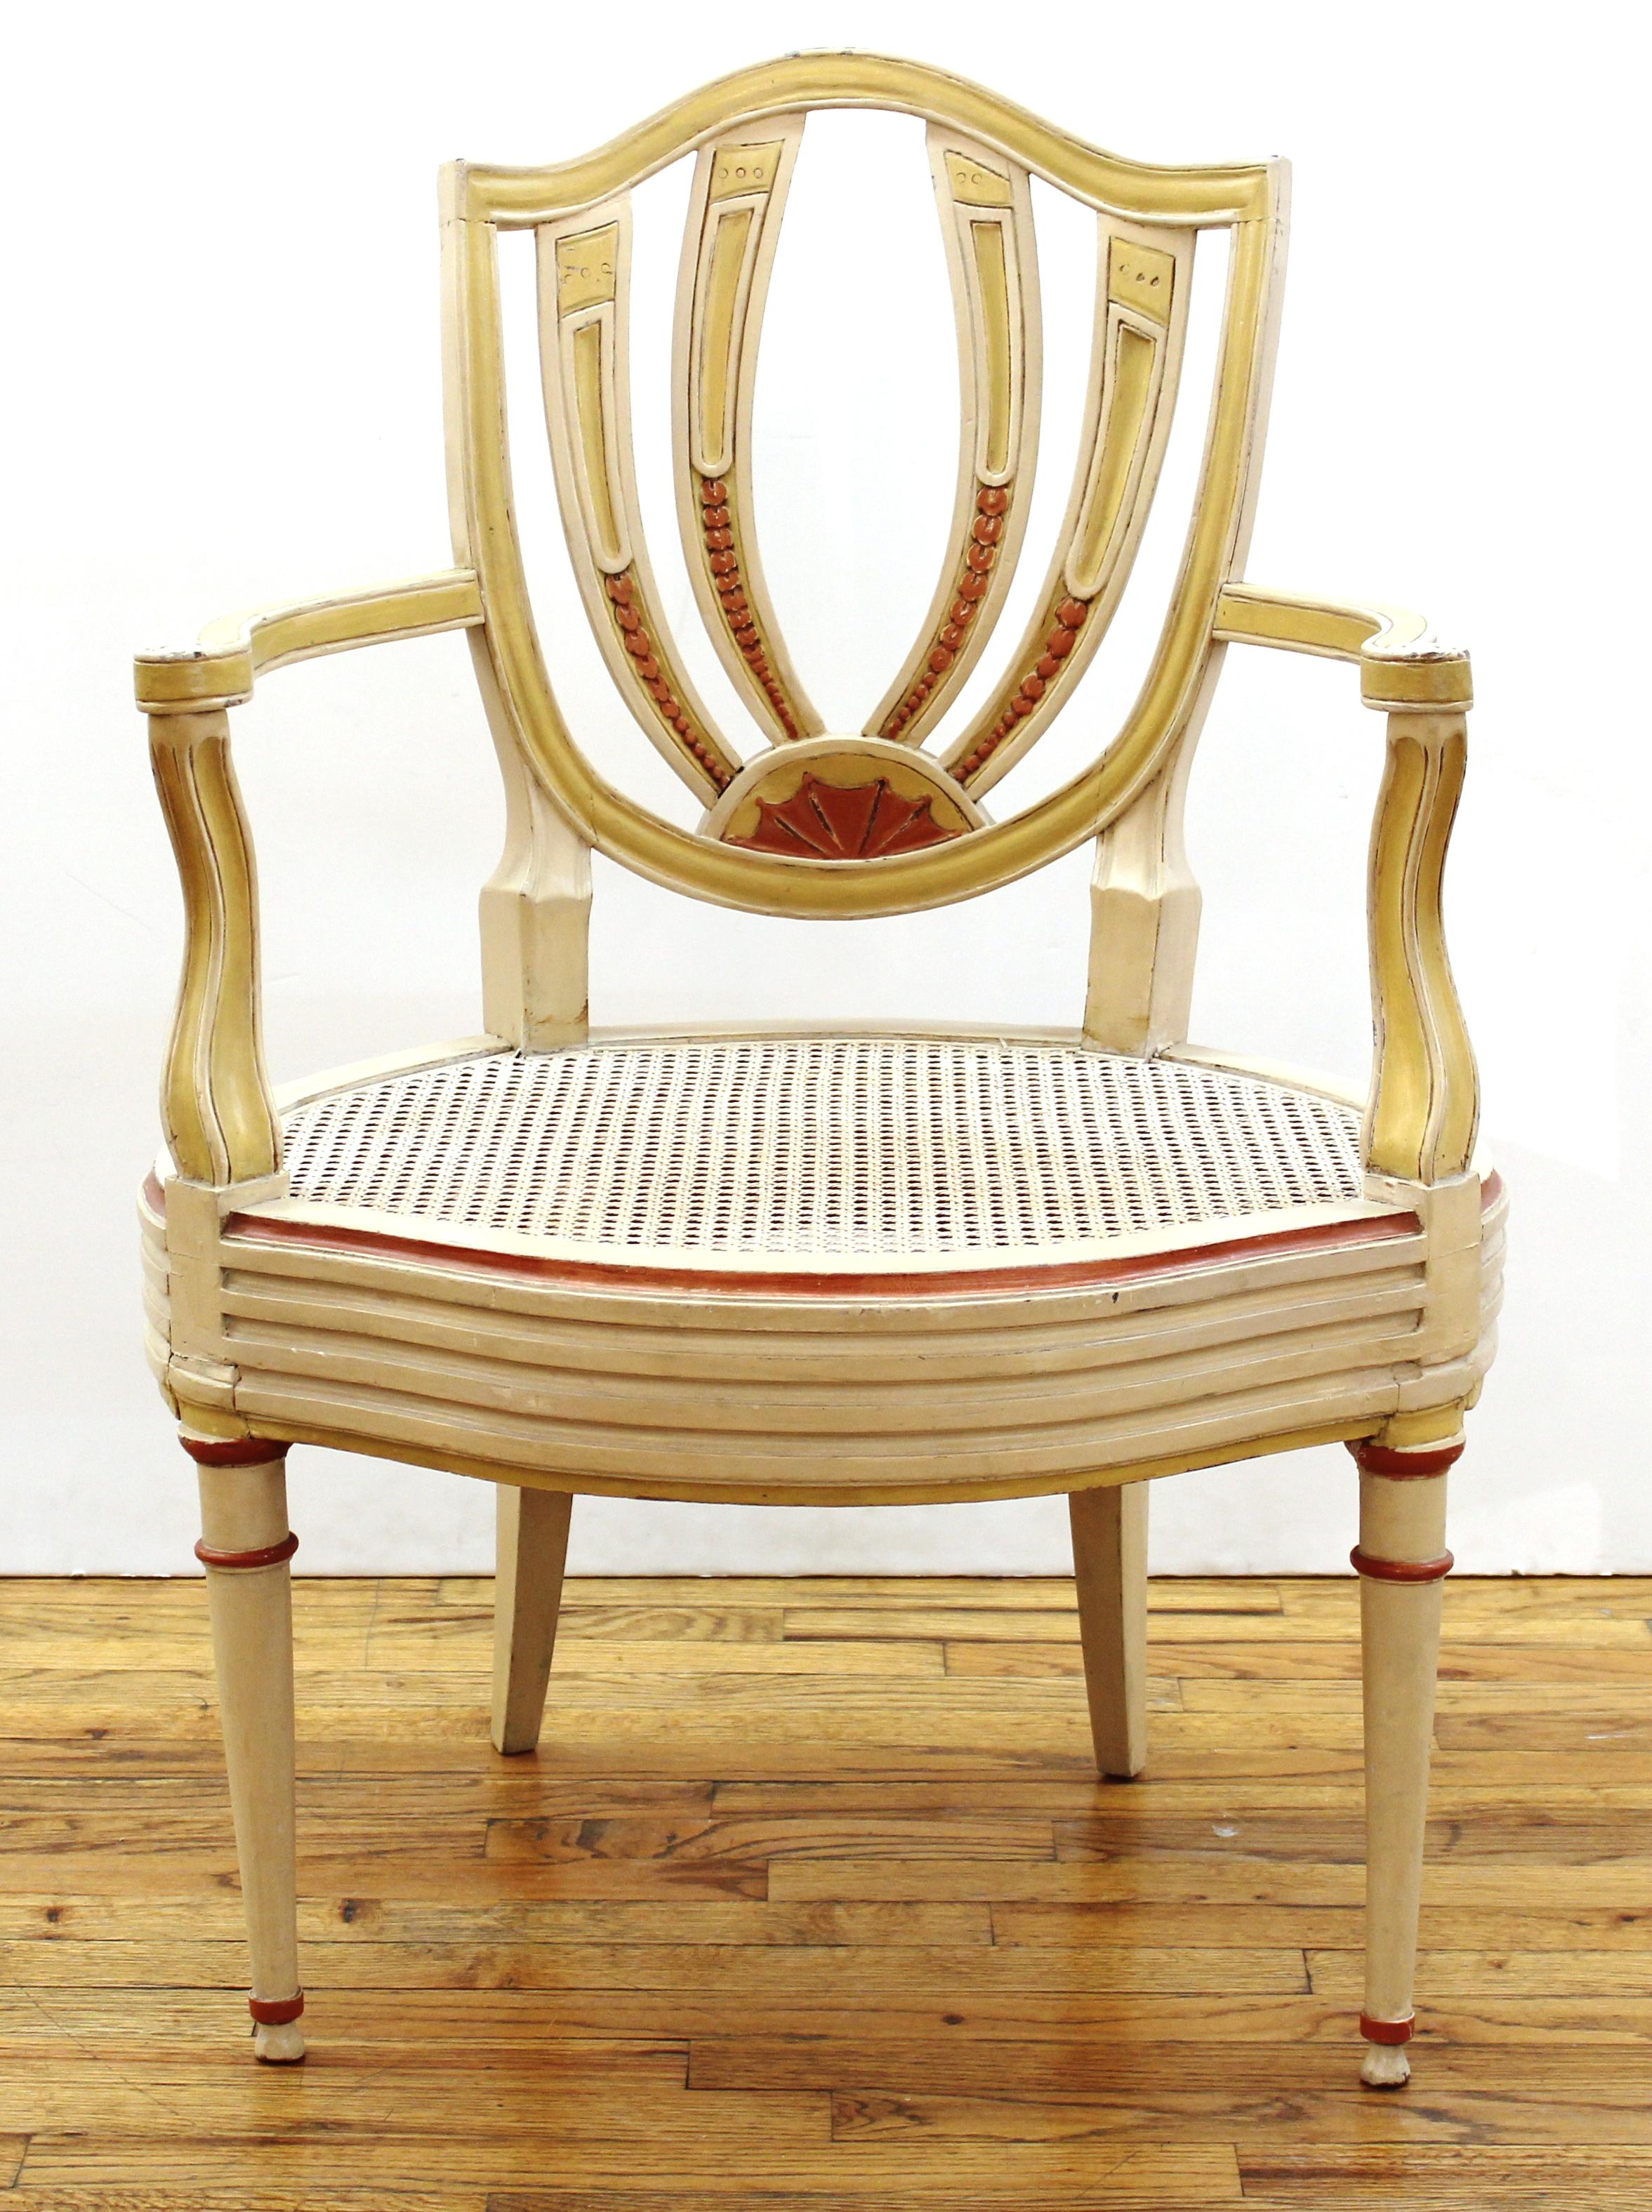 English Hepplewhite style pair of antique shield back paint decorated armchairs with caned seats. Old Sotheby's auction tags and labels on the bottom. Measures: 38